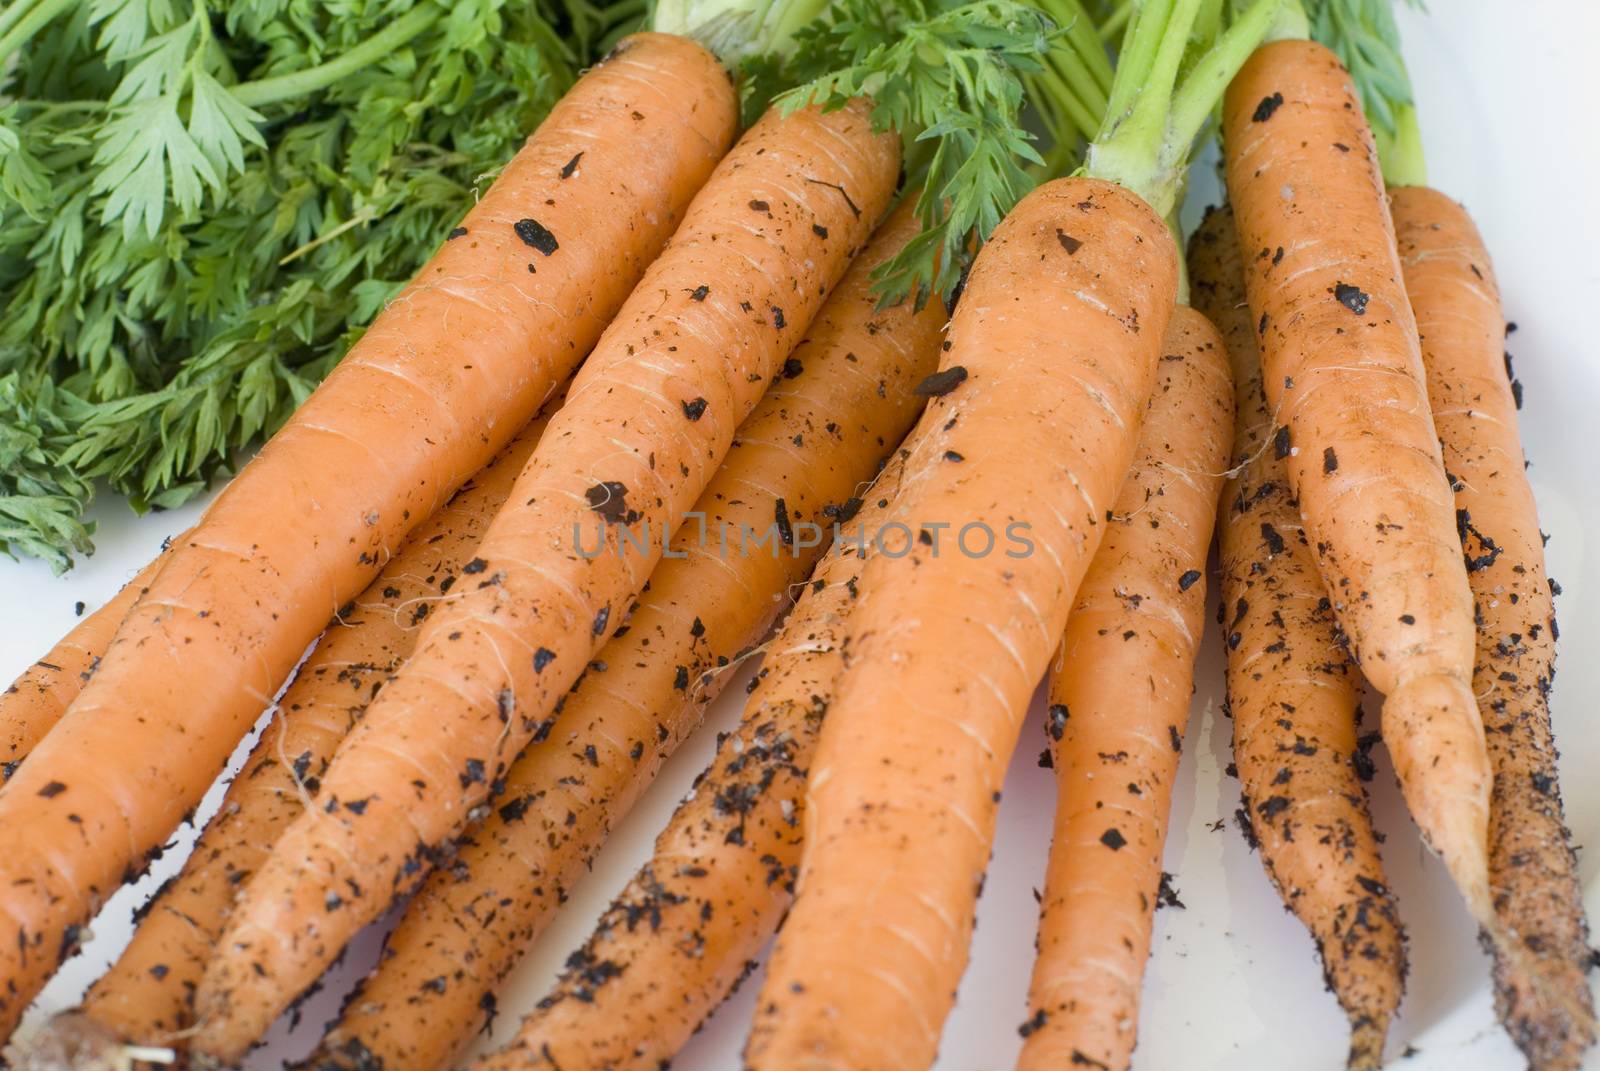 Freshly picked home grown carrots with adhering soil and green leaves in a close up view on a white background